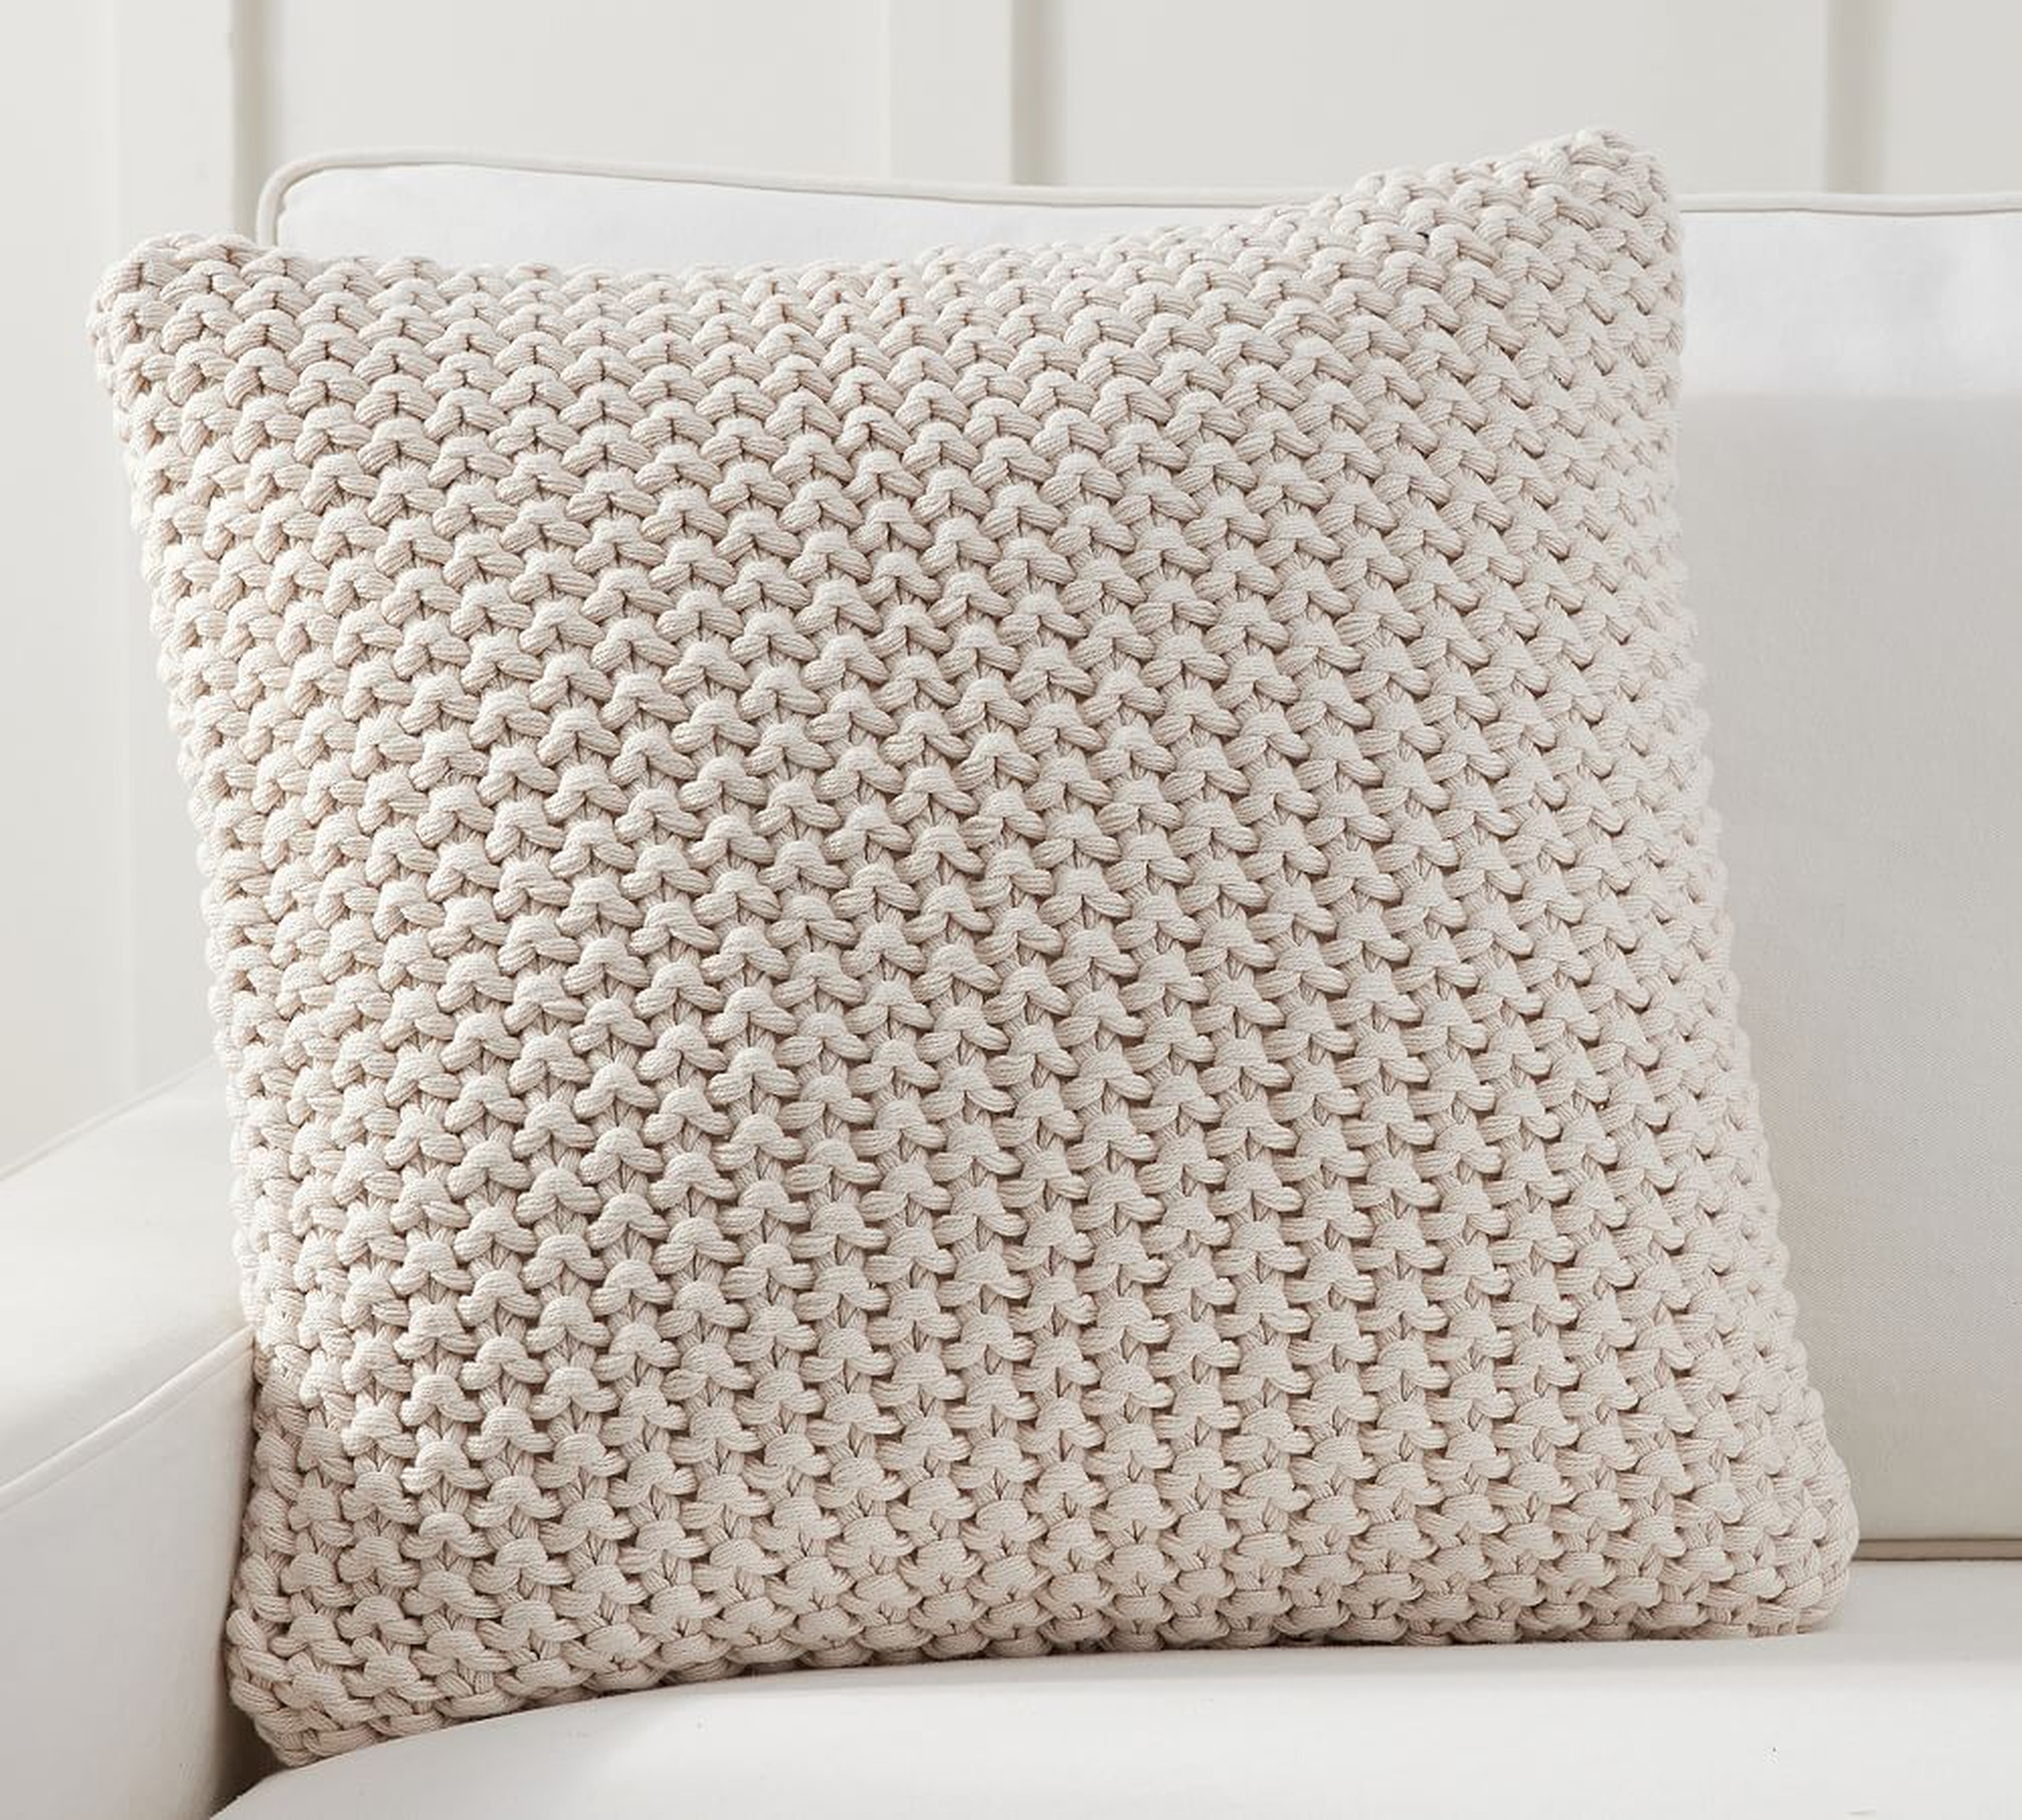 Bayside Seedstitch Pillow Cover, 22", Ivory - Pottery Barn